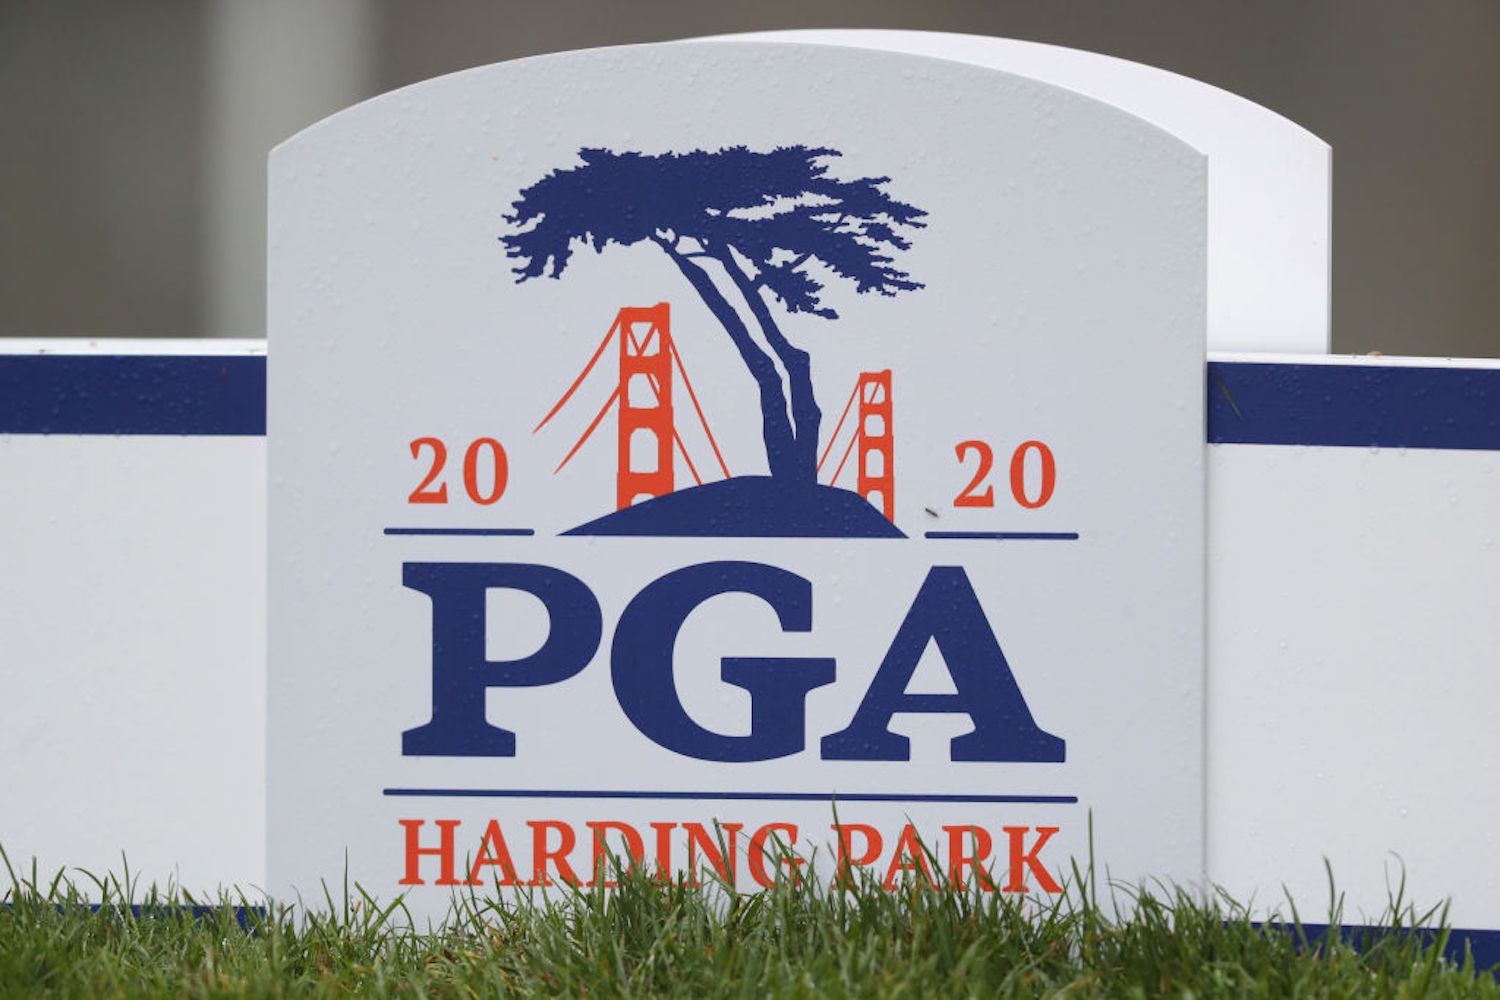 Major championship golf courses are rarely available to the public, but TPC Harding Park is a municipal course anyone can play for $80.